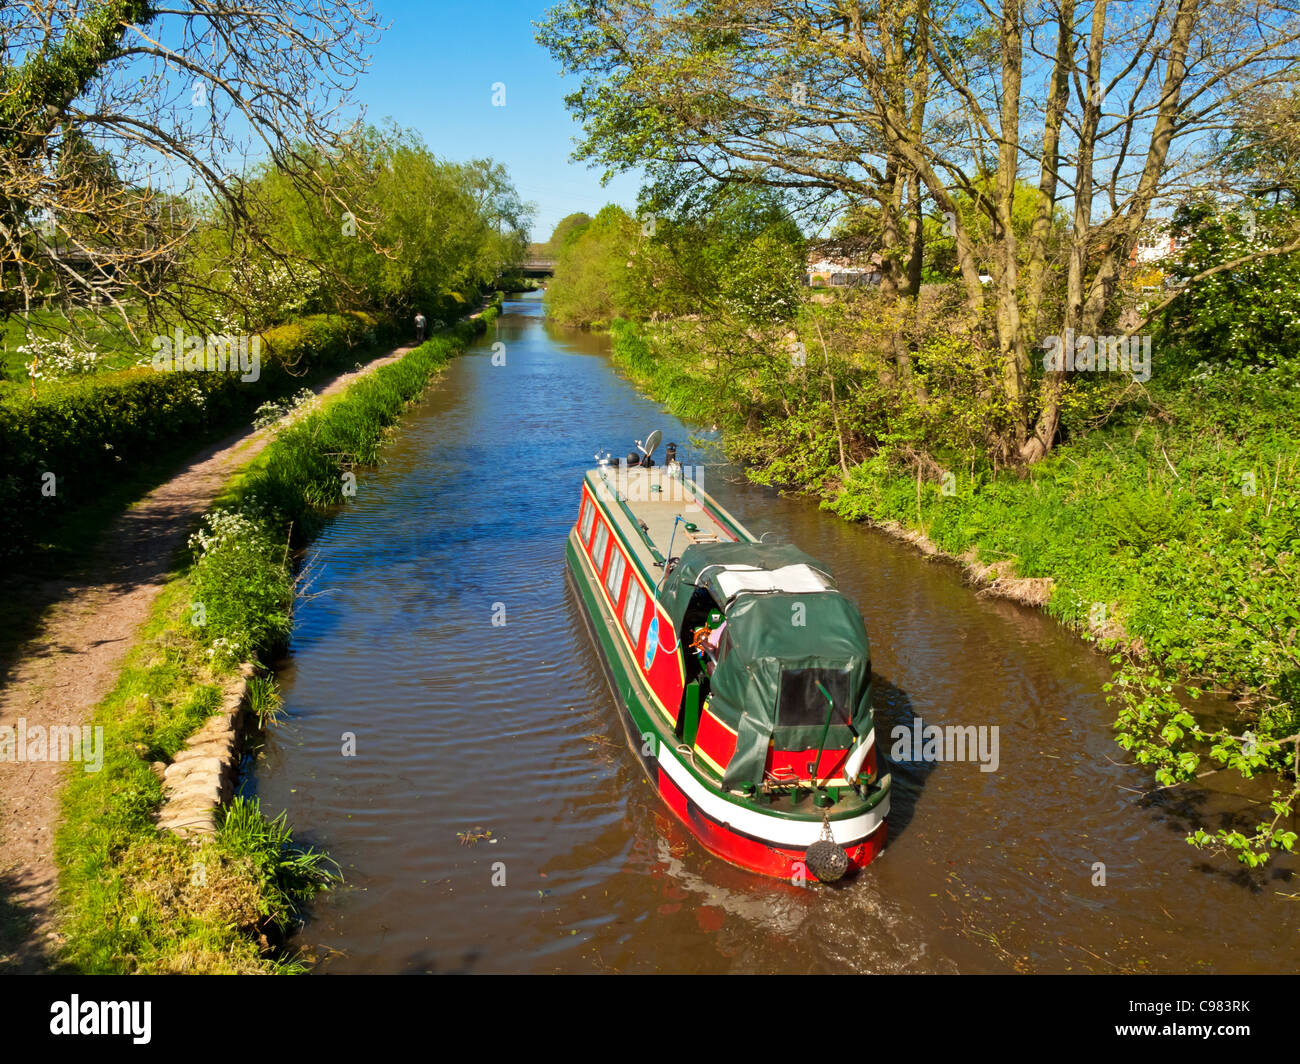 Narrowboat cruising on Staffordshire and Worcestershire Canal in Stafford West Midlands England UK built 1771 by James Brindley Stock Photo